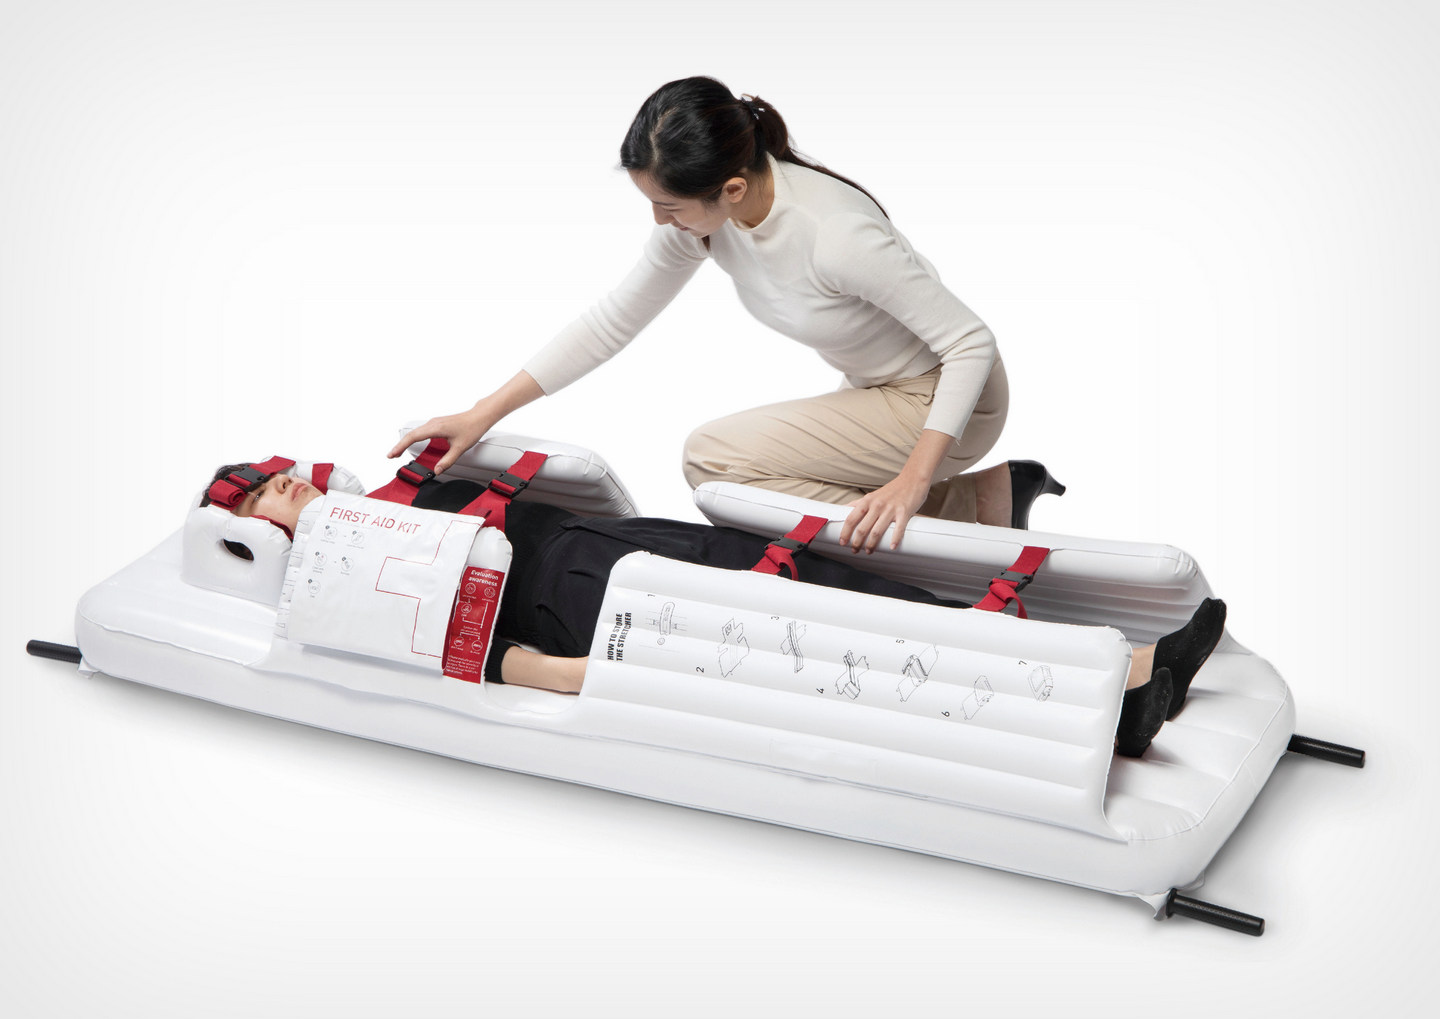 #Award-winning inflatable stretcher design helps secure and protect patients in transit